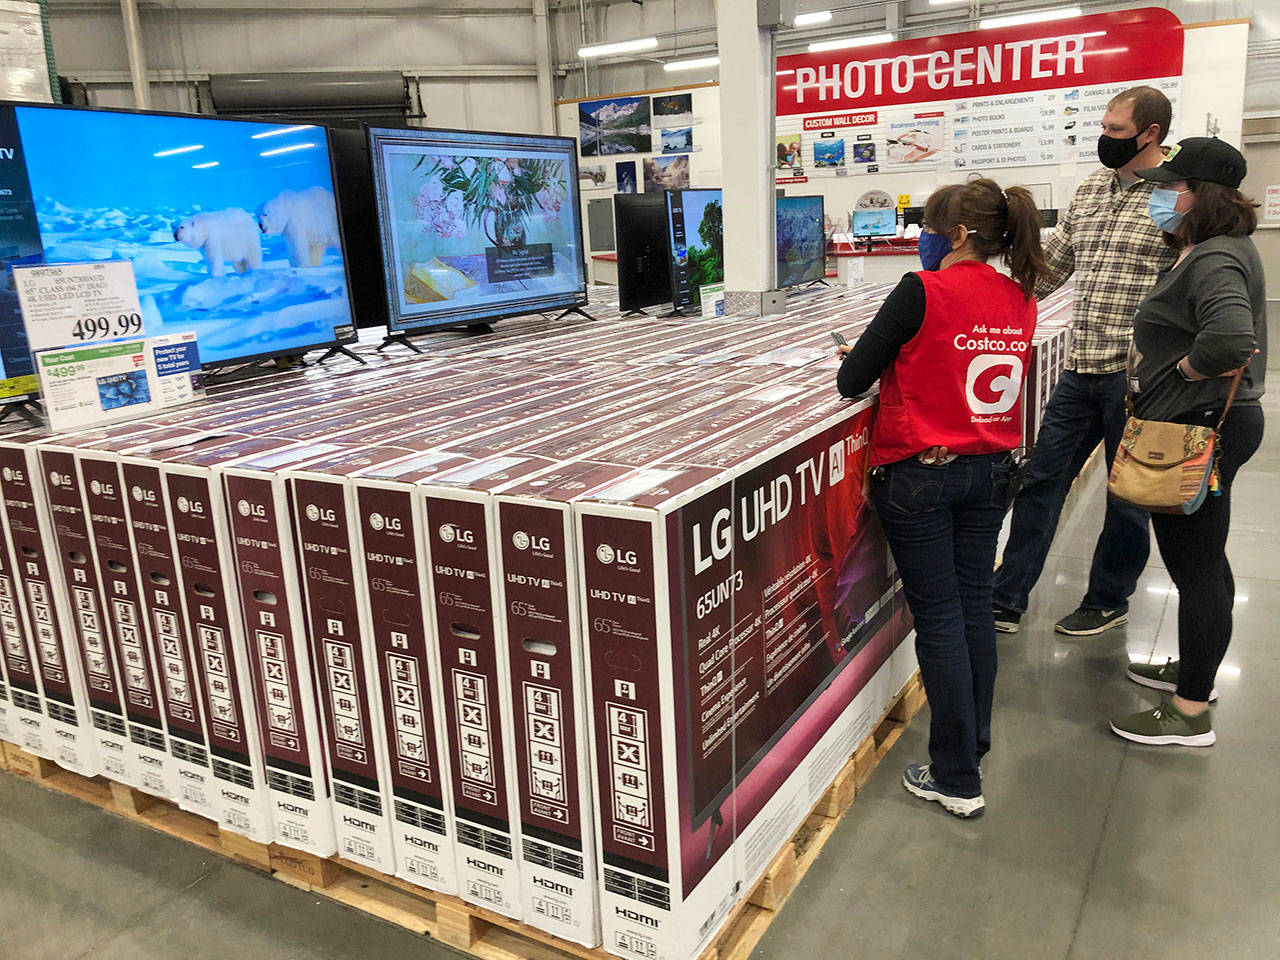 A sales associate helps customers as they consider the purchase of a big-screen television at a Costco warehouse Wednesday, Nov. 18, 2020, in Sheridan, Colo. U.S. consumer confidence fell to a reading of 96.1 in November as rising coronavirus cases pushed Americans’ confidence down to the lowest level since August. The Conference Board said the November reading represented a drop from a revised 101.4 in October. (David Zalubowski/The Associated Press)